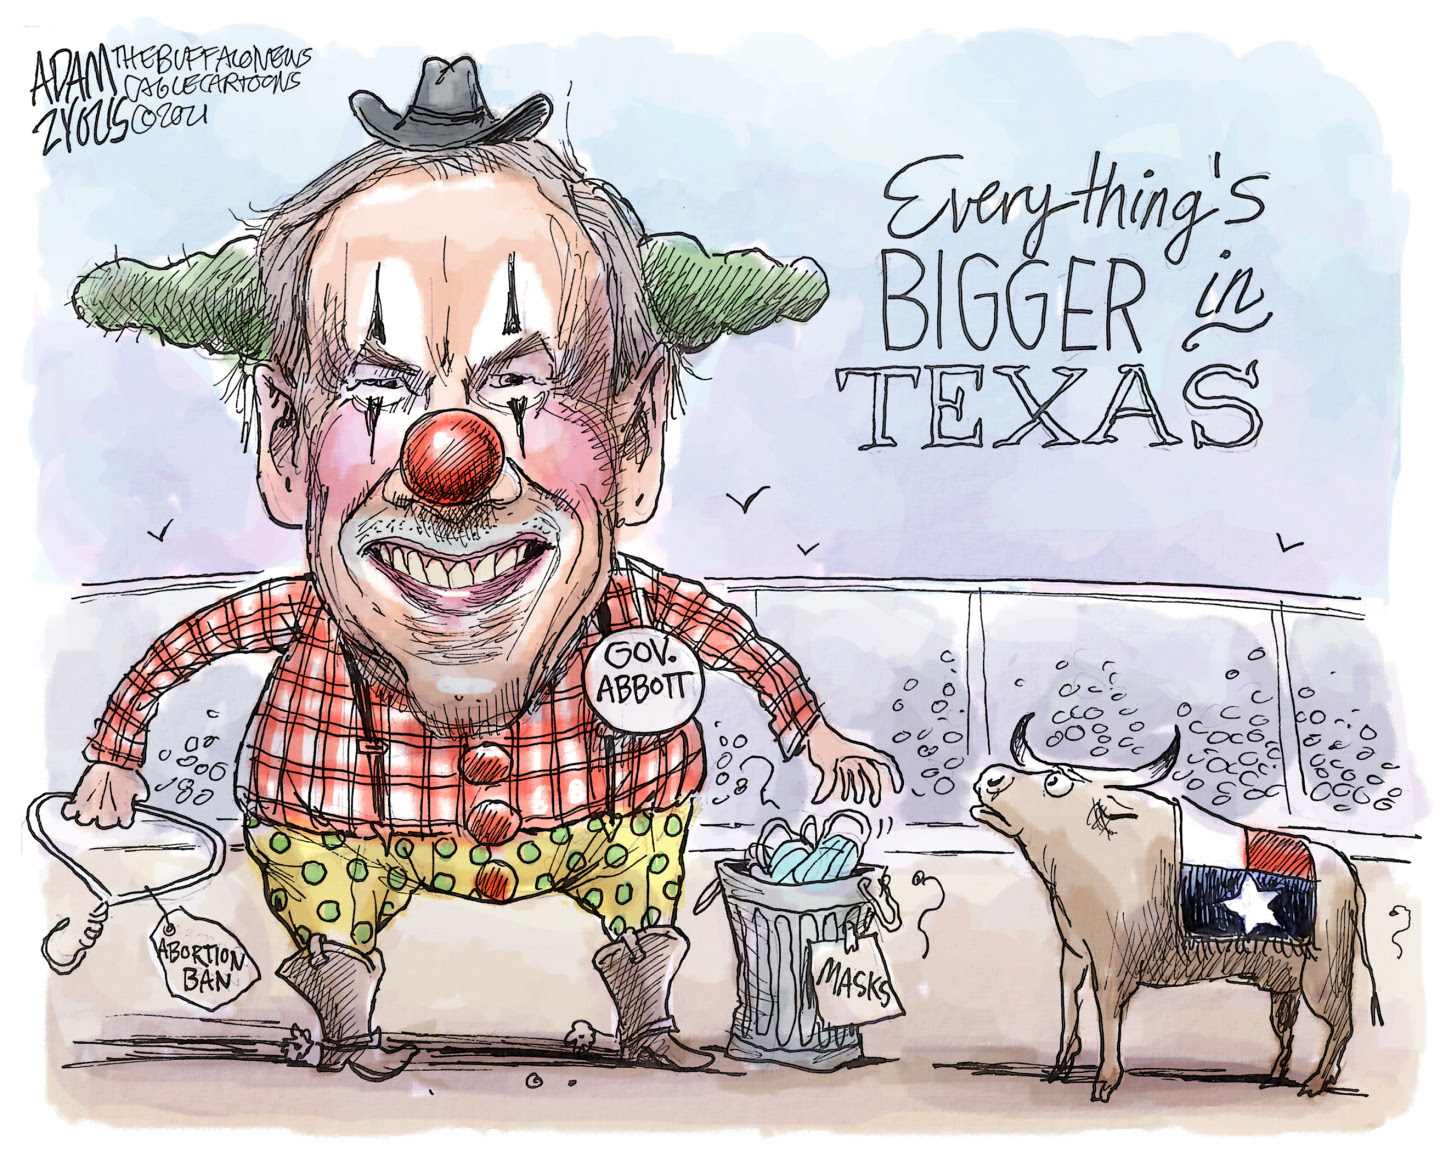 Greg Abbott bans abortions, offers bounties to vigilantes while ignoring COVID safety measures.